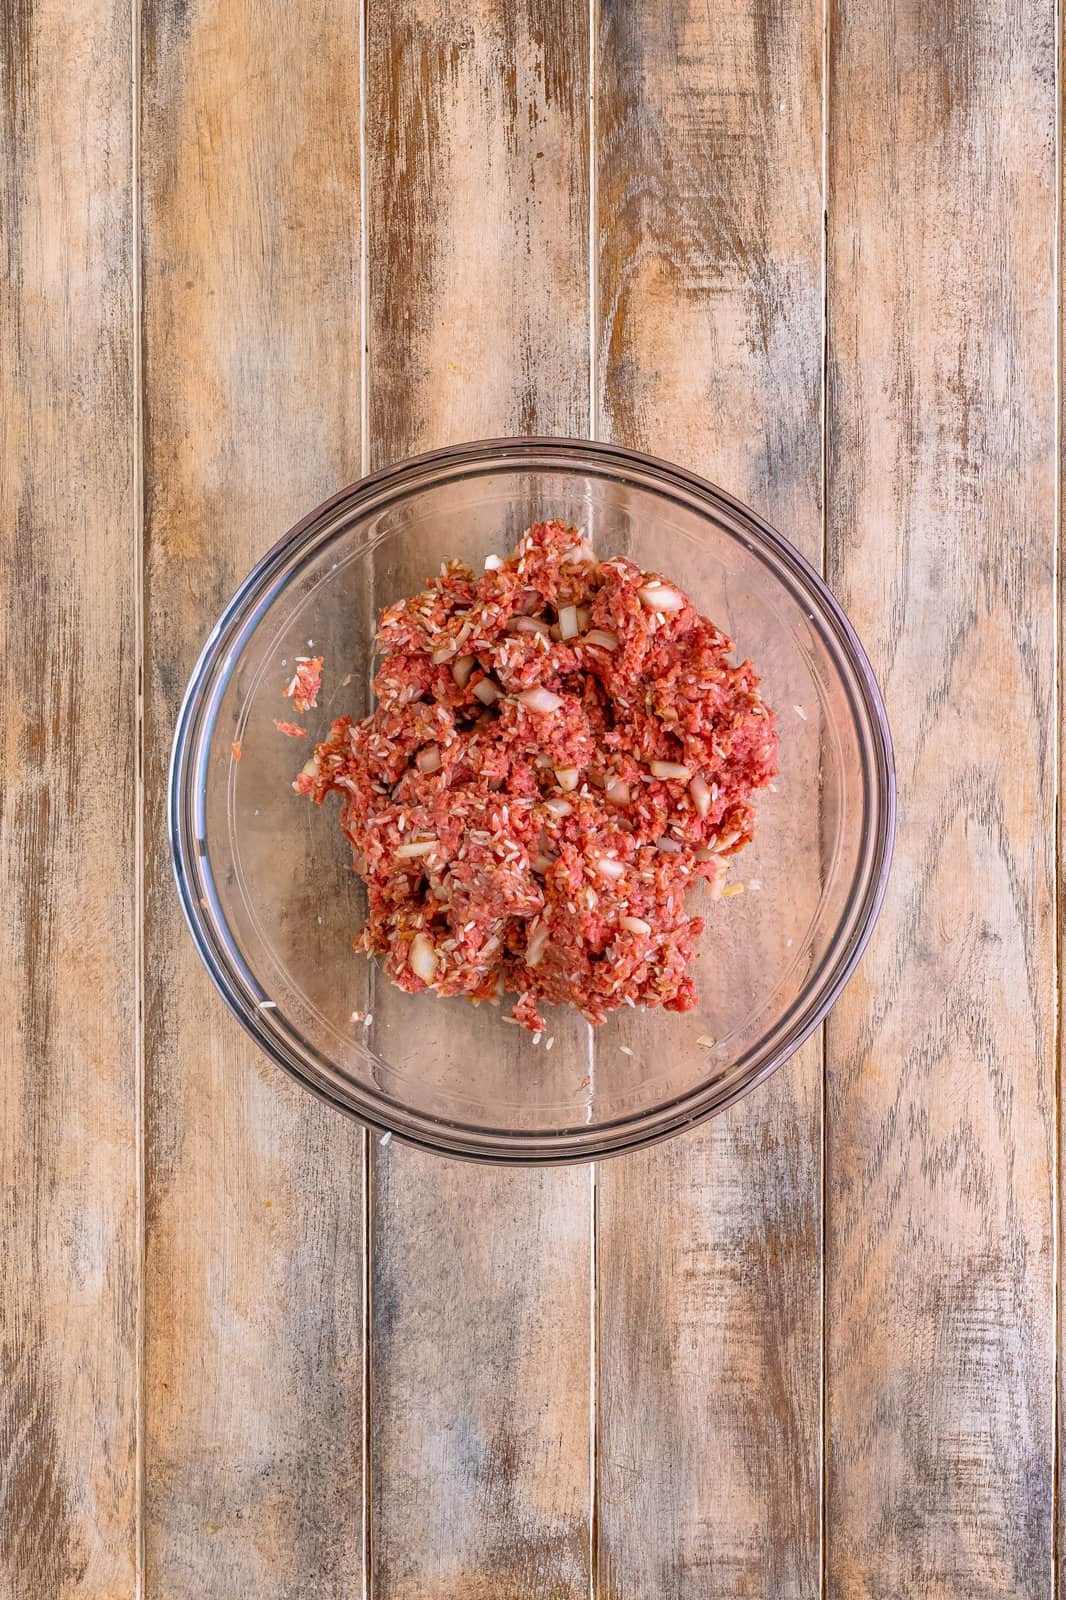 A glass mixing bowl of ground beef and other ingredients needed to make meatballs all mixed together.